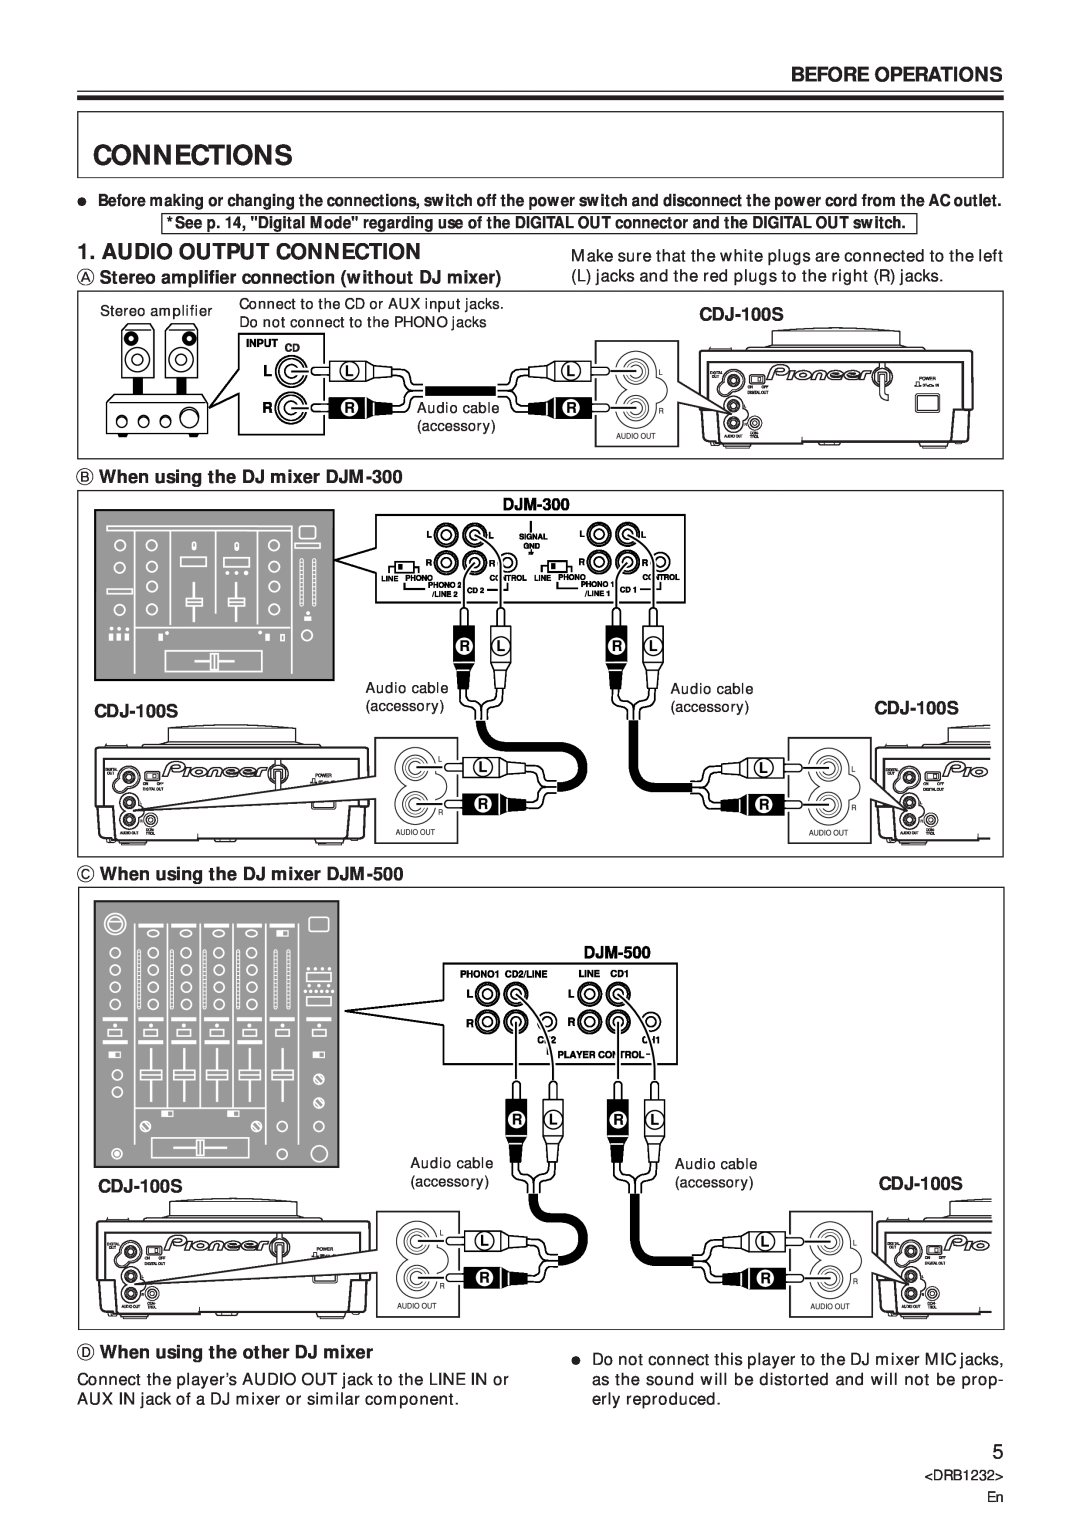 Pioneer CDJ-100S specifications Connections, Before Operations, A Stereo amplifier connection without DJ mixer 